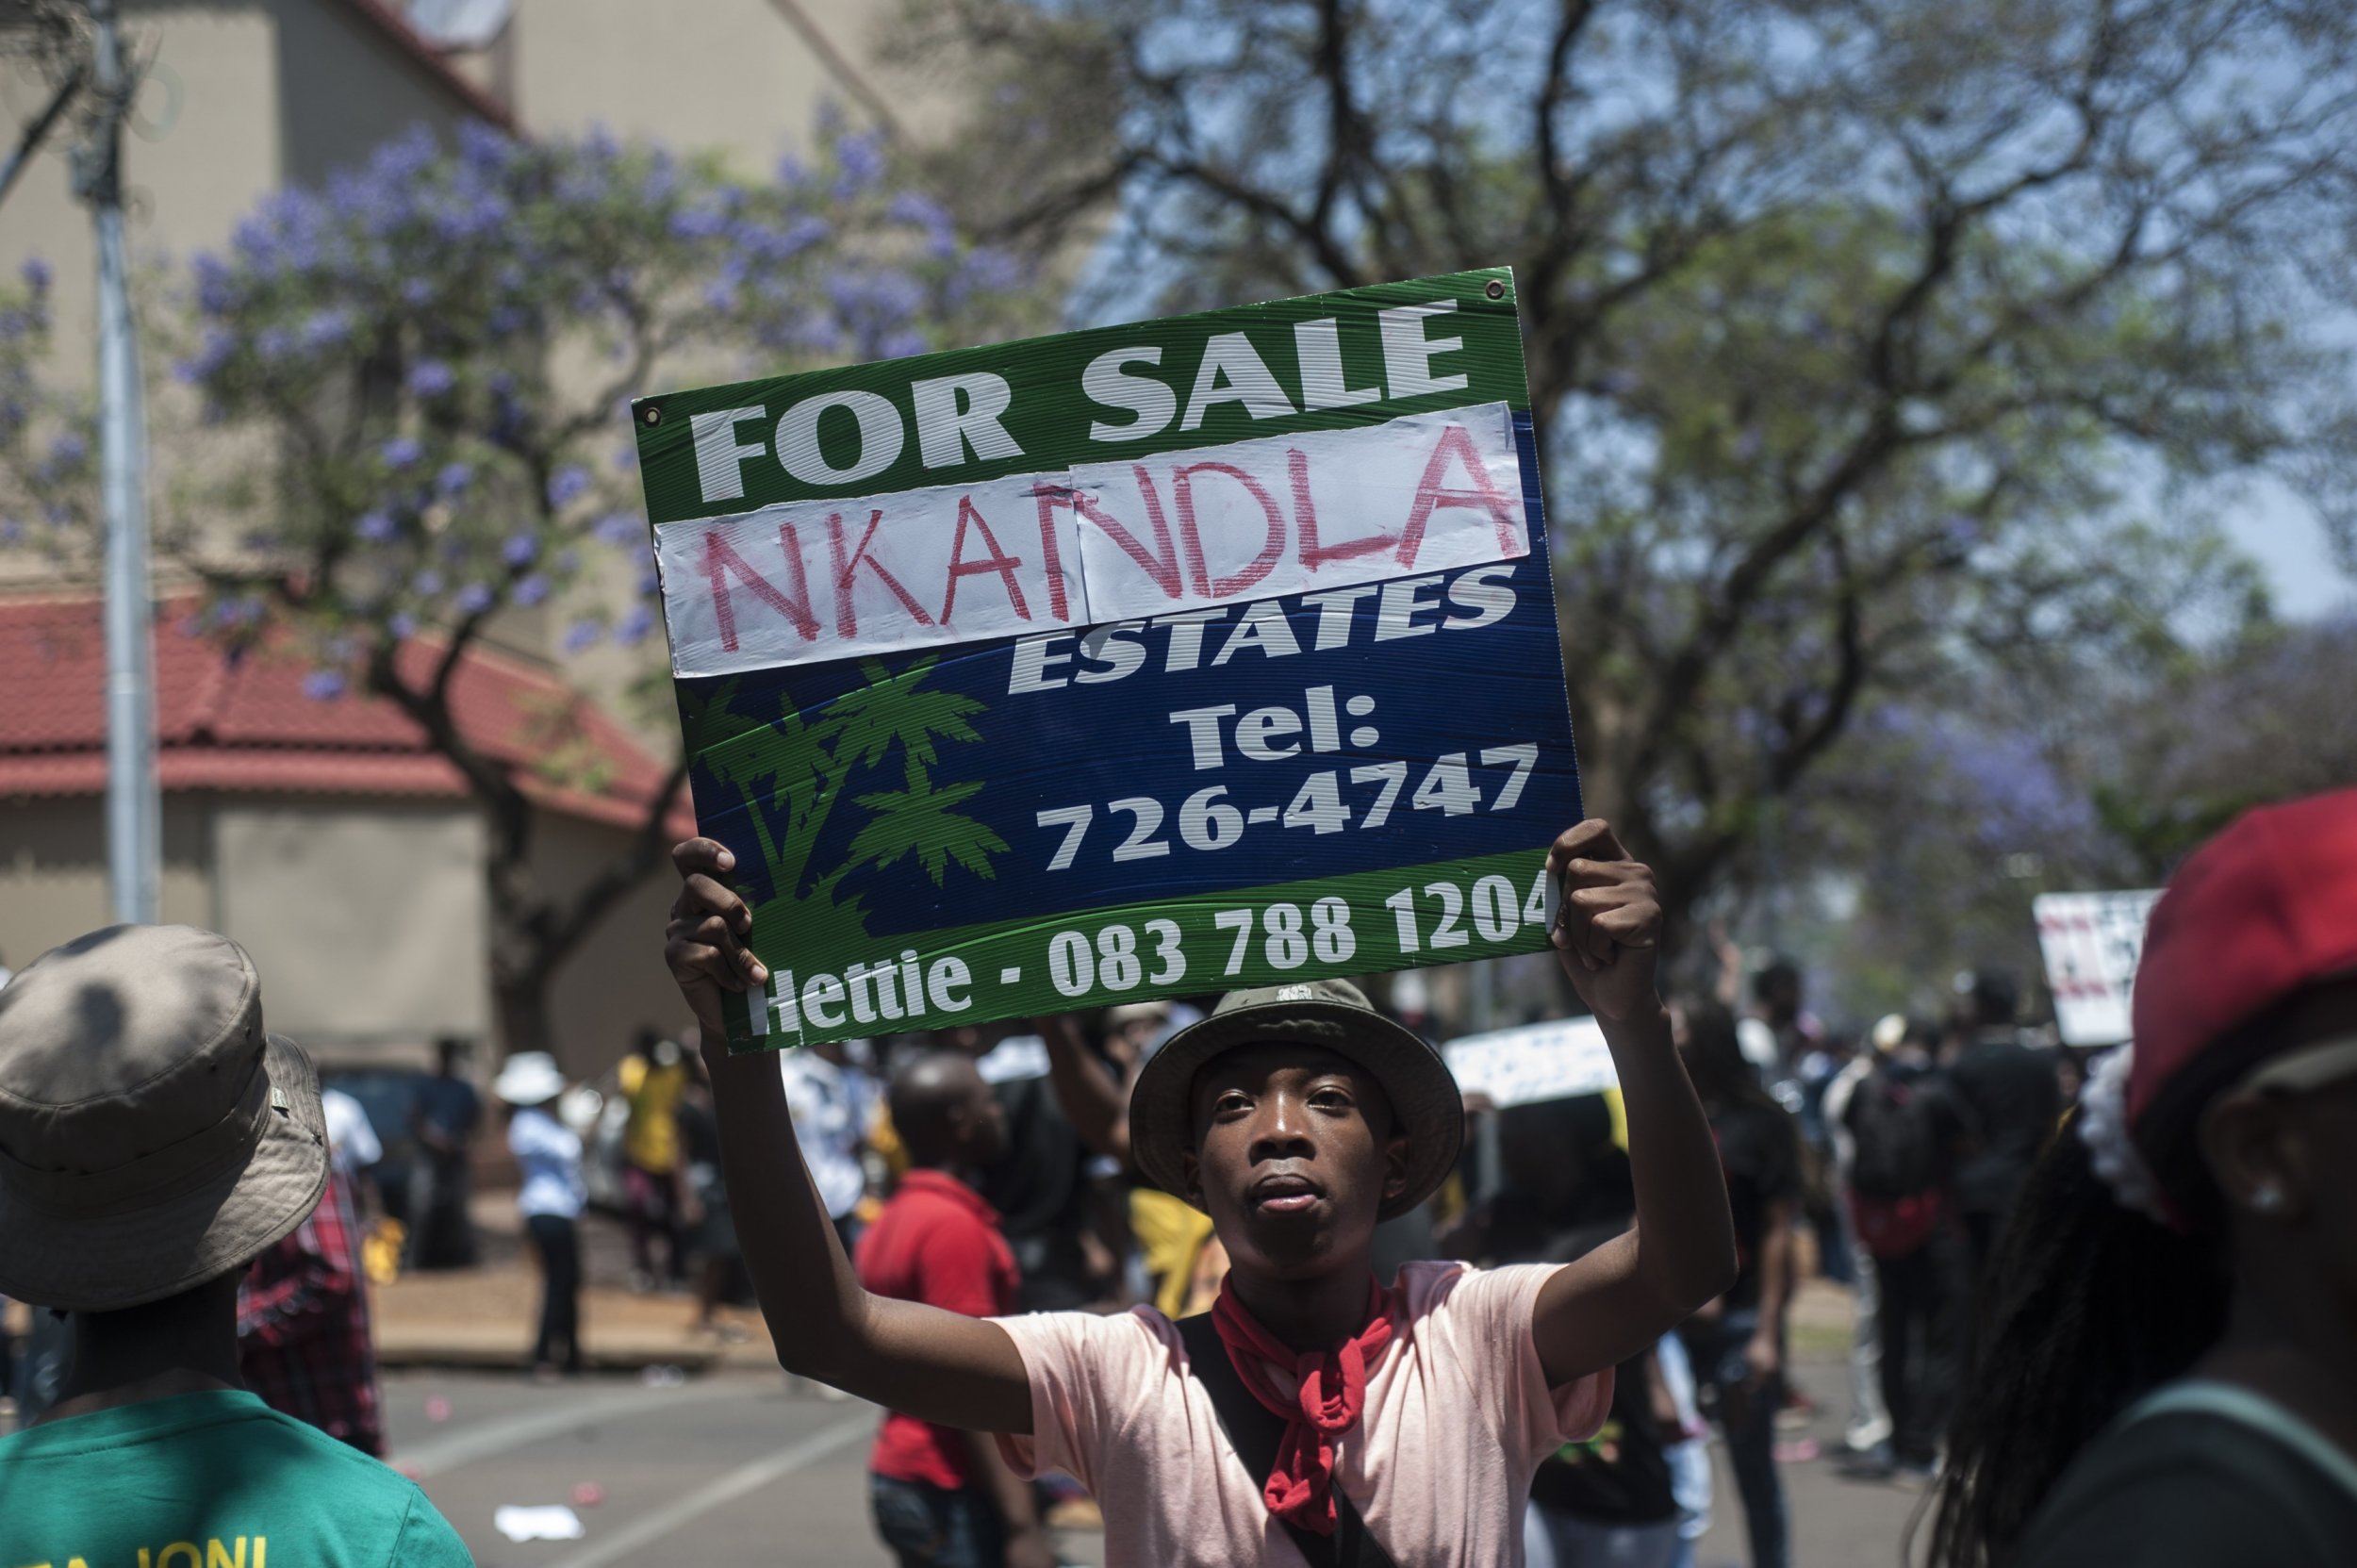 A South African protestor holds an Nkandla sign in Pretoria.